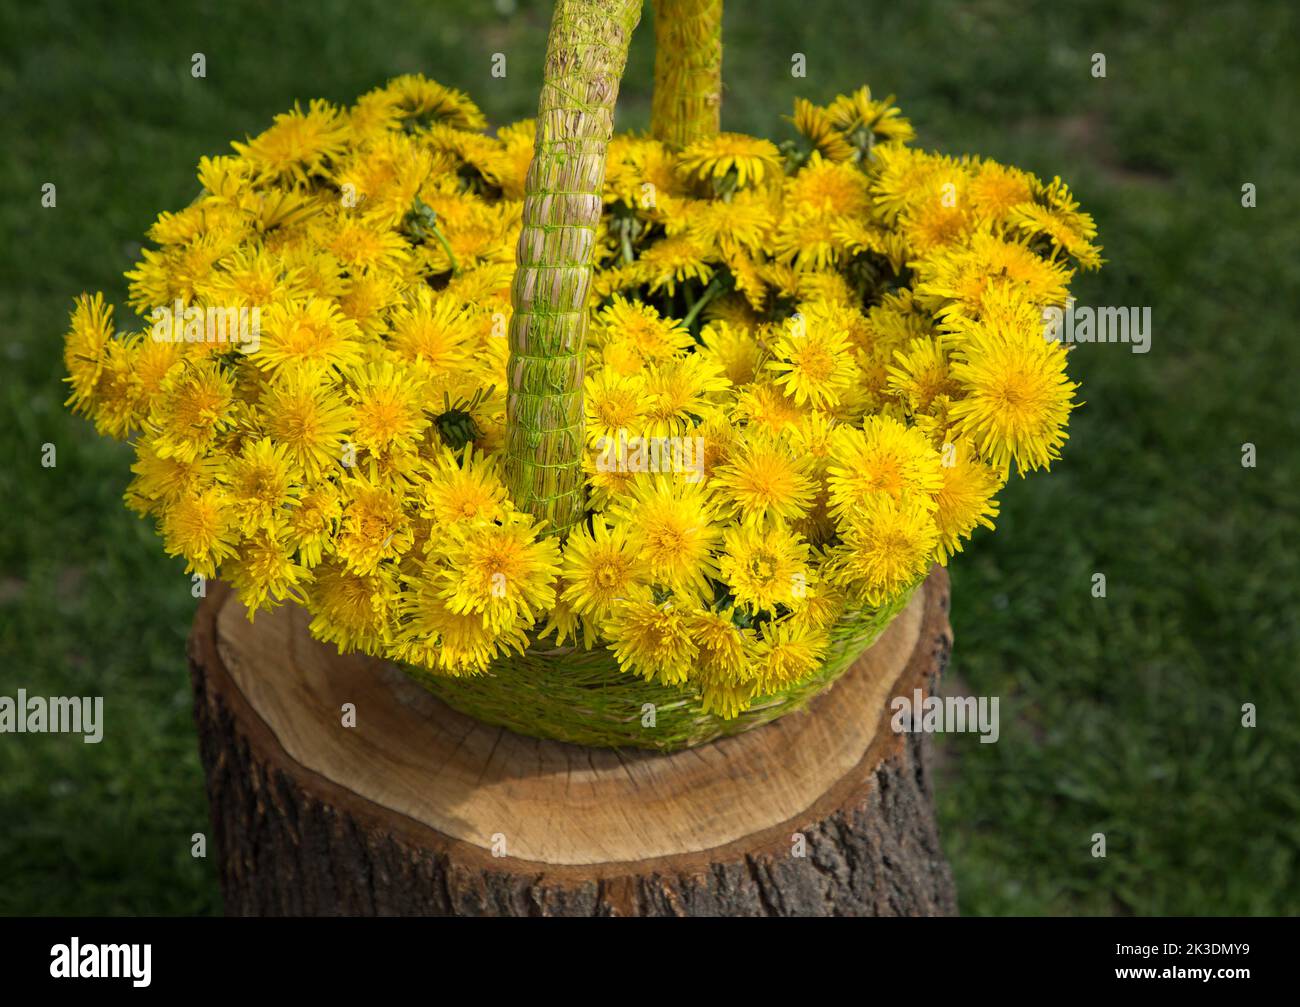 wicker basket full of spring flowers - yellow dandelions against of green grass. Mother's day, gift for mom. greeting card, thank you, romantic surpri Stock Photo